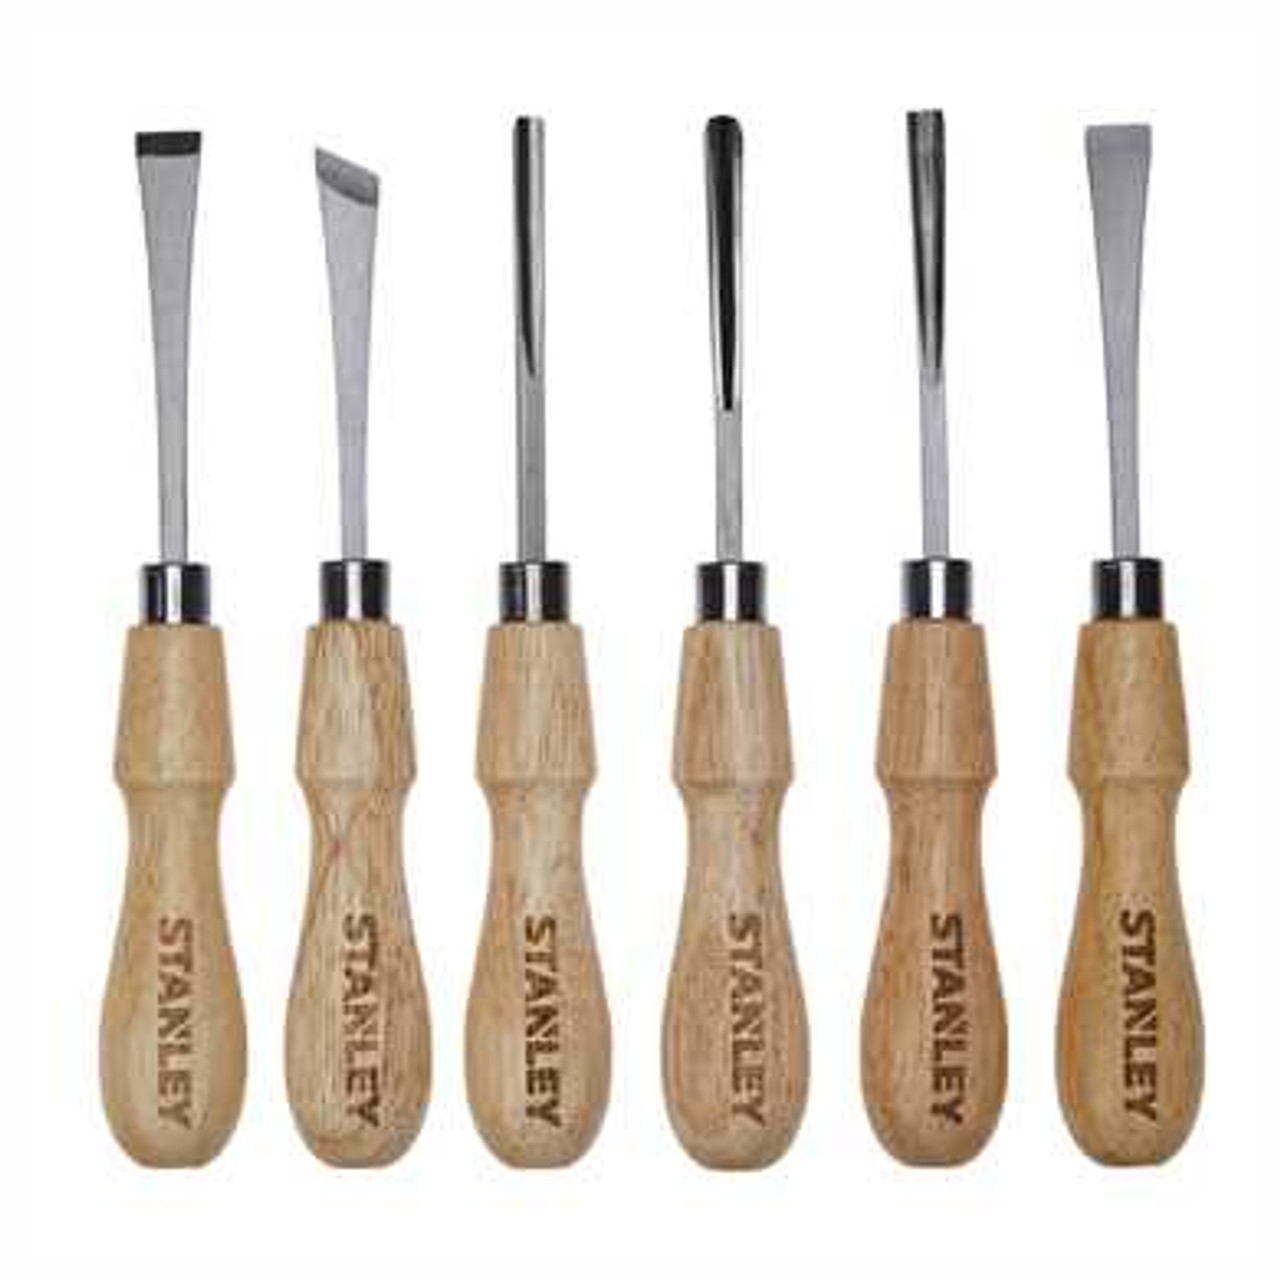 Stanley Tools 6 pc. Wood Carving Tool Set STHT16863